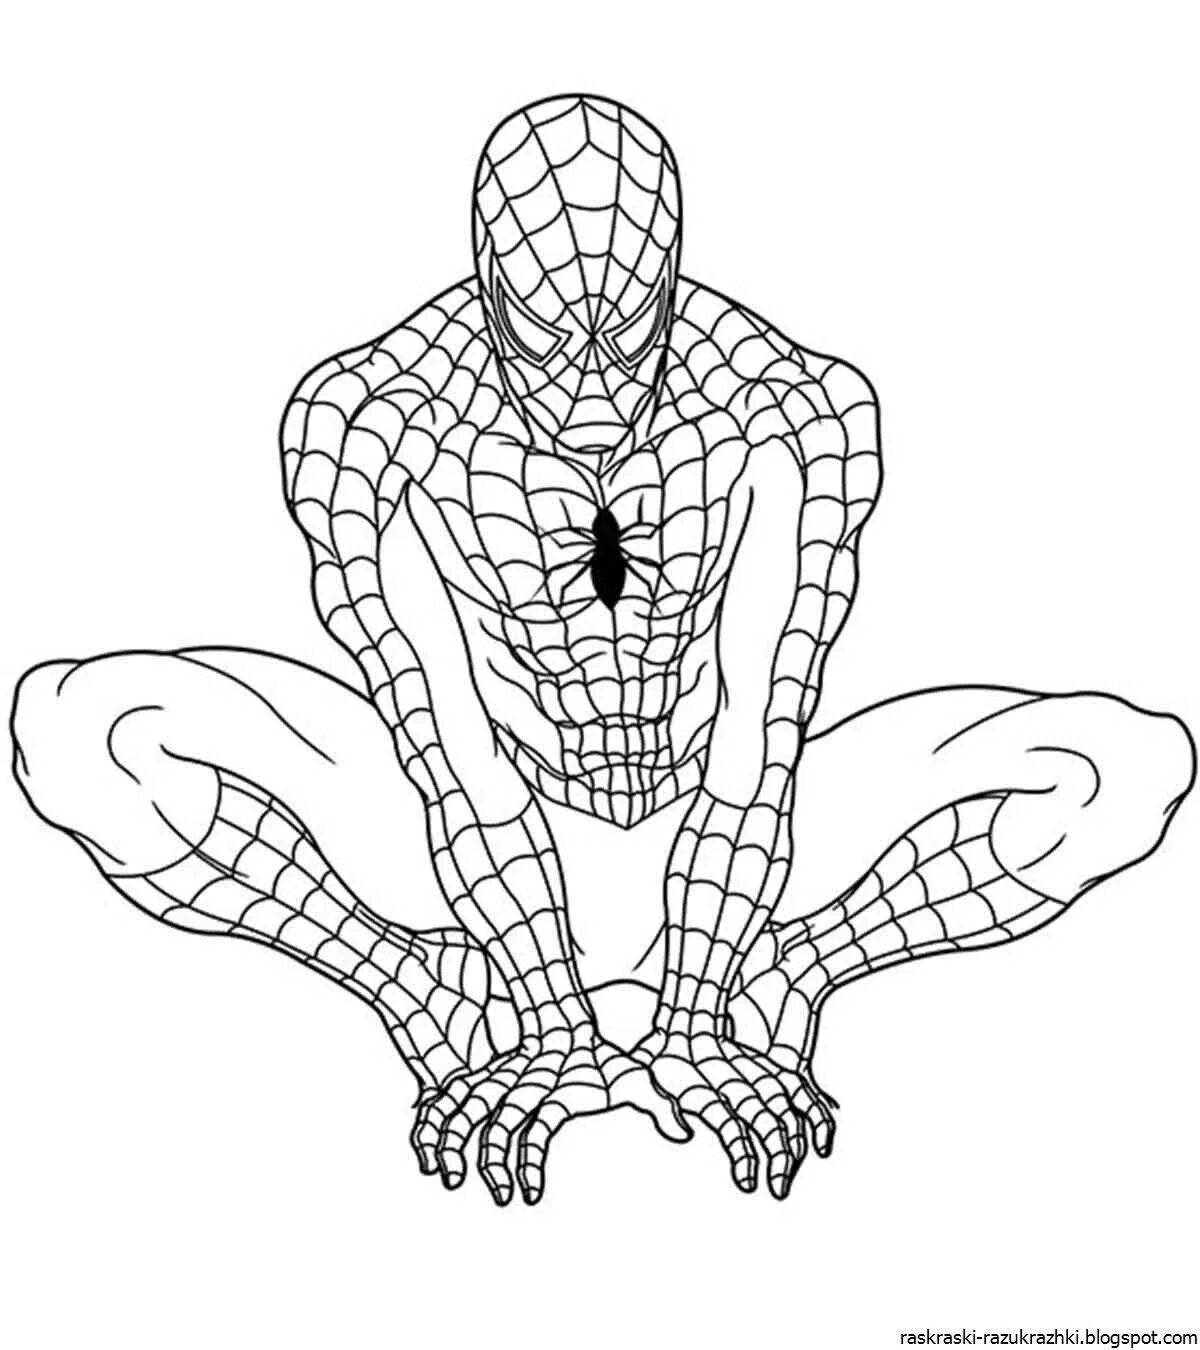 Vibrant Spiderman Coloring Page for Kids